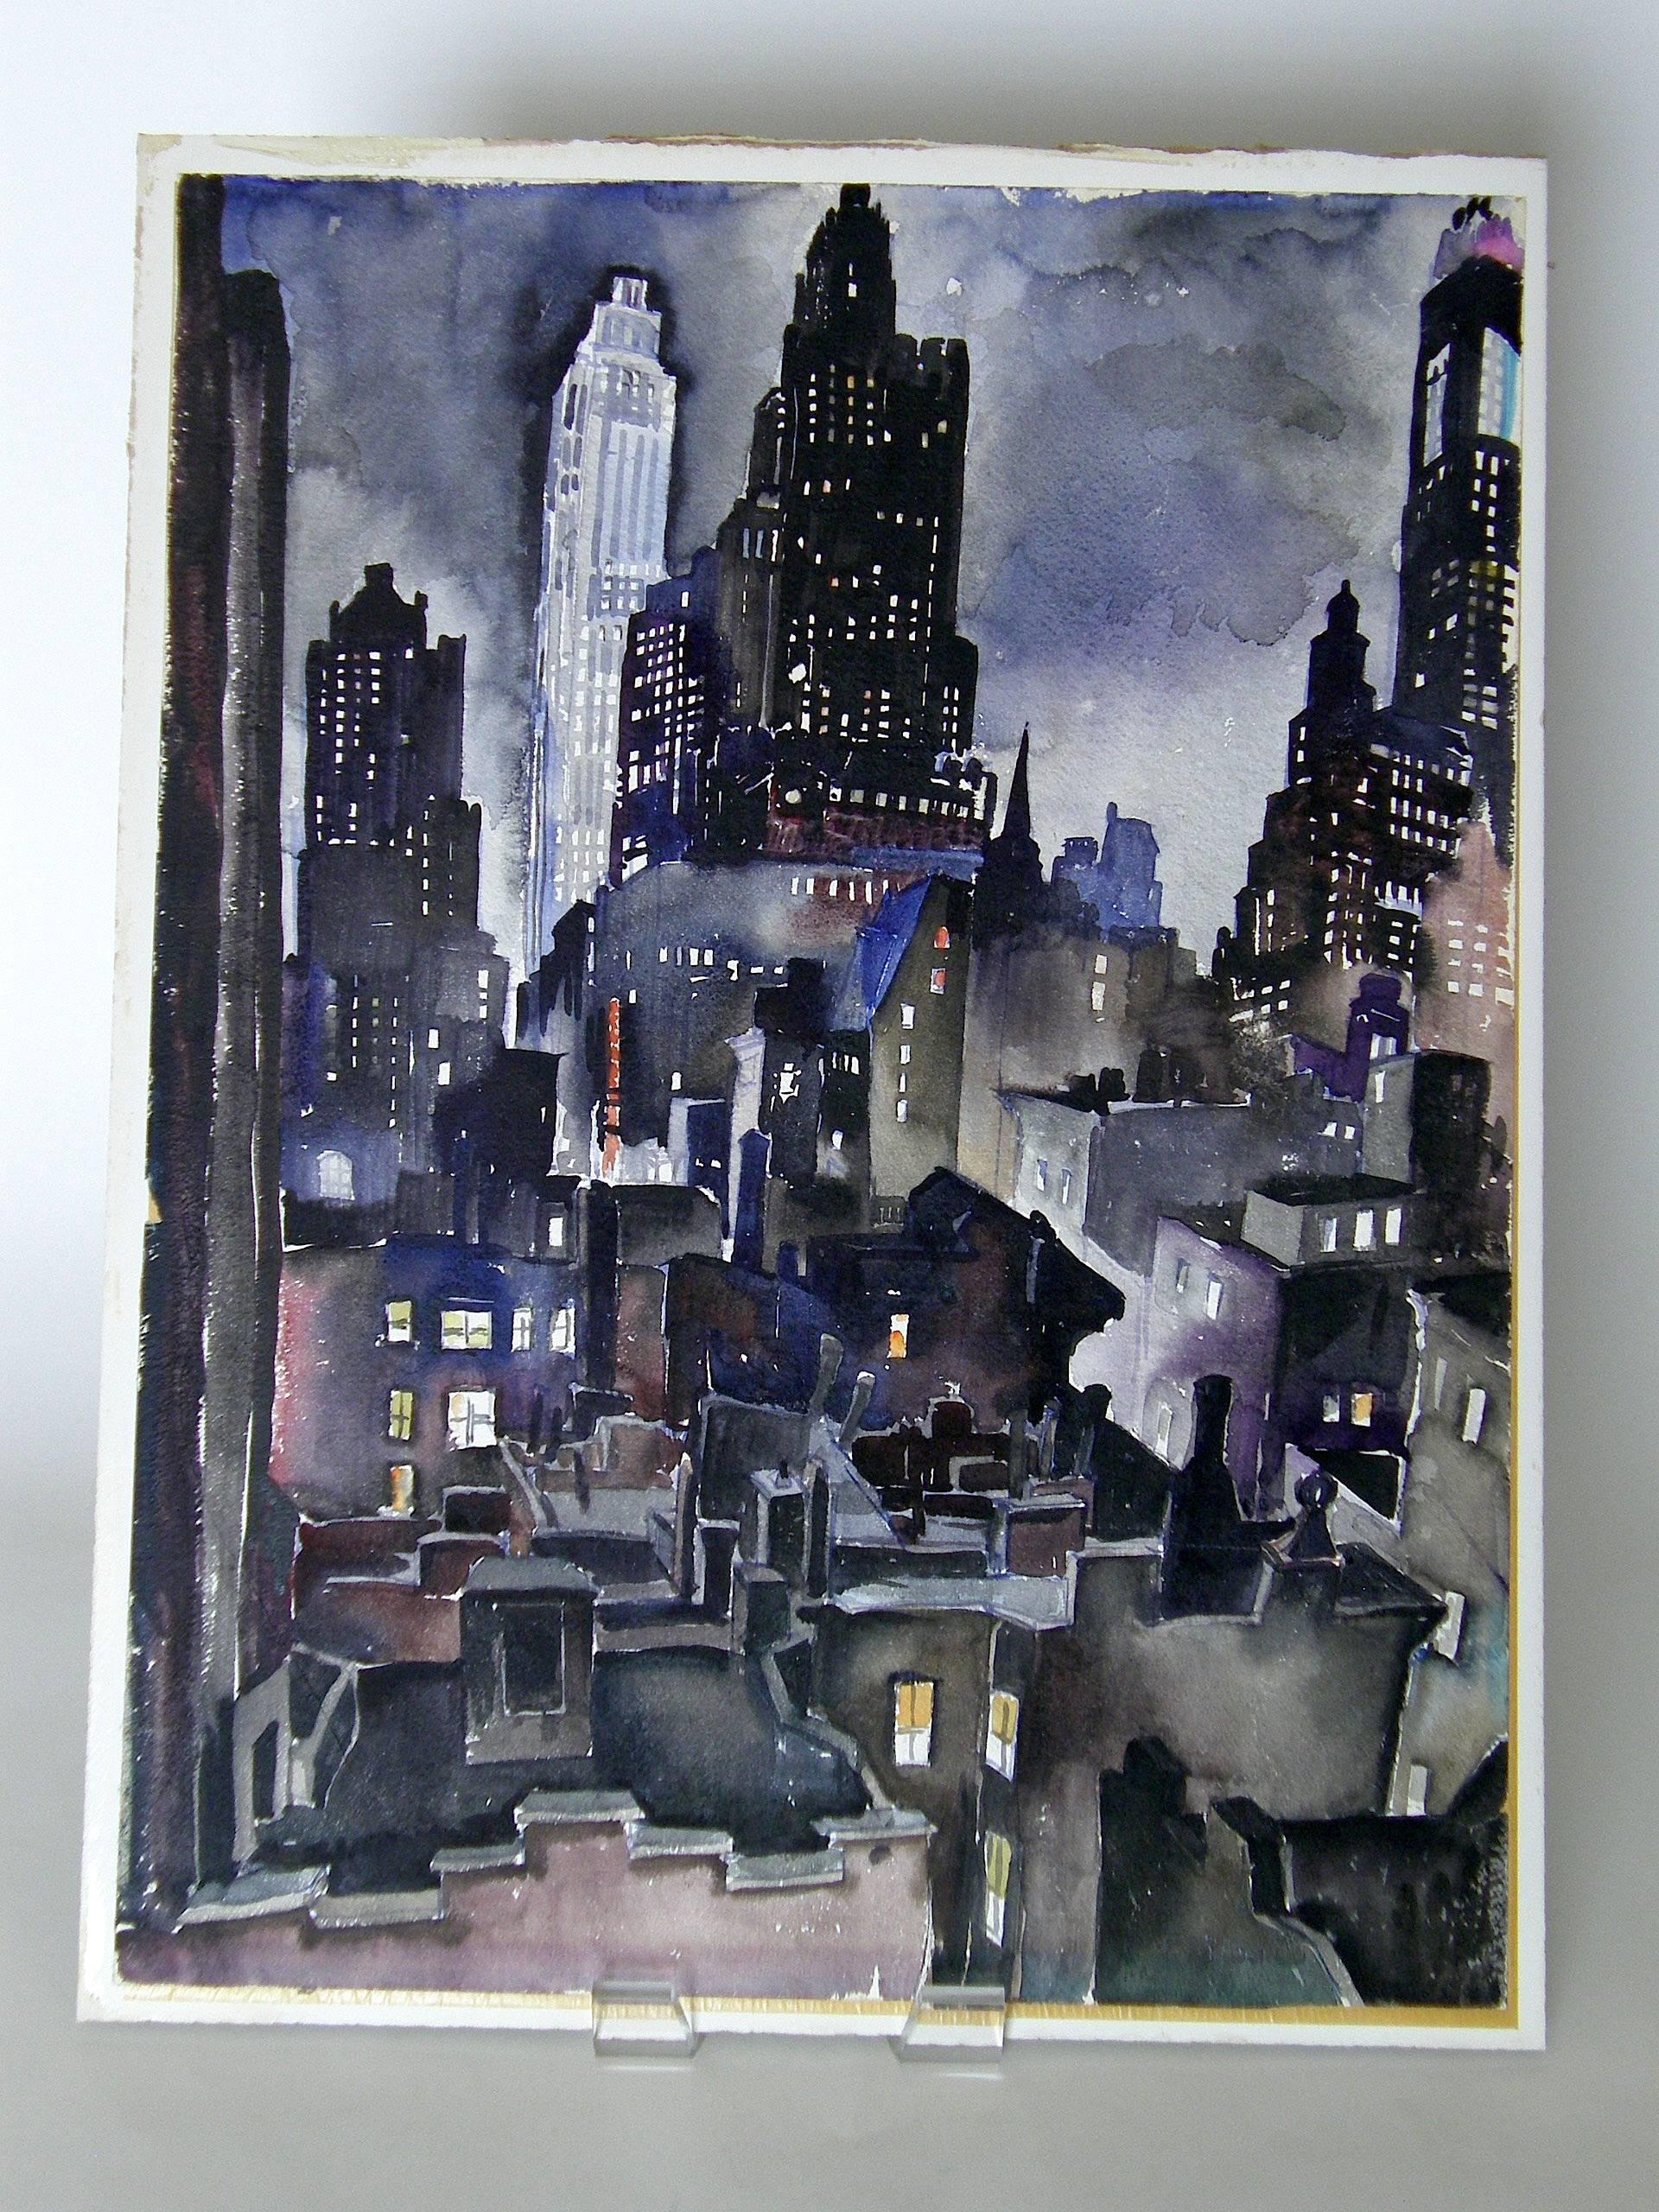 Untitled watercolor depicting a slice of the New York city skyline, by Ruth Van Sickle Ford, circa 1940s. This atmospheric piece beautifully captures the character of the city having the grandeur of the skyscrapers juxtaposed with the more intimate